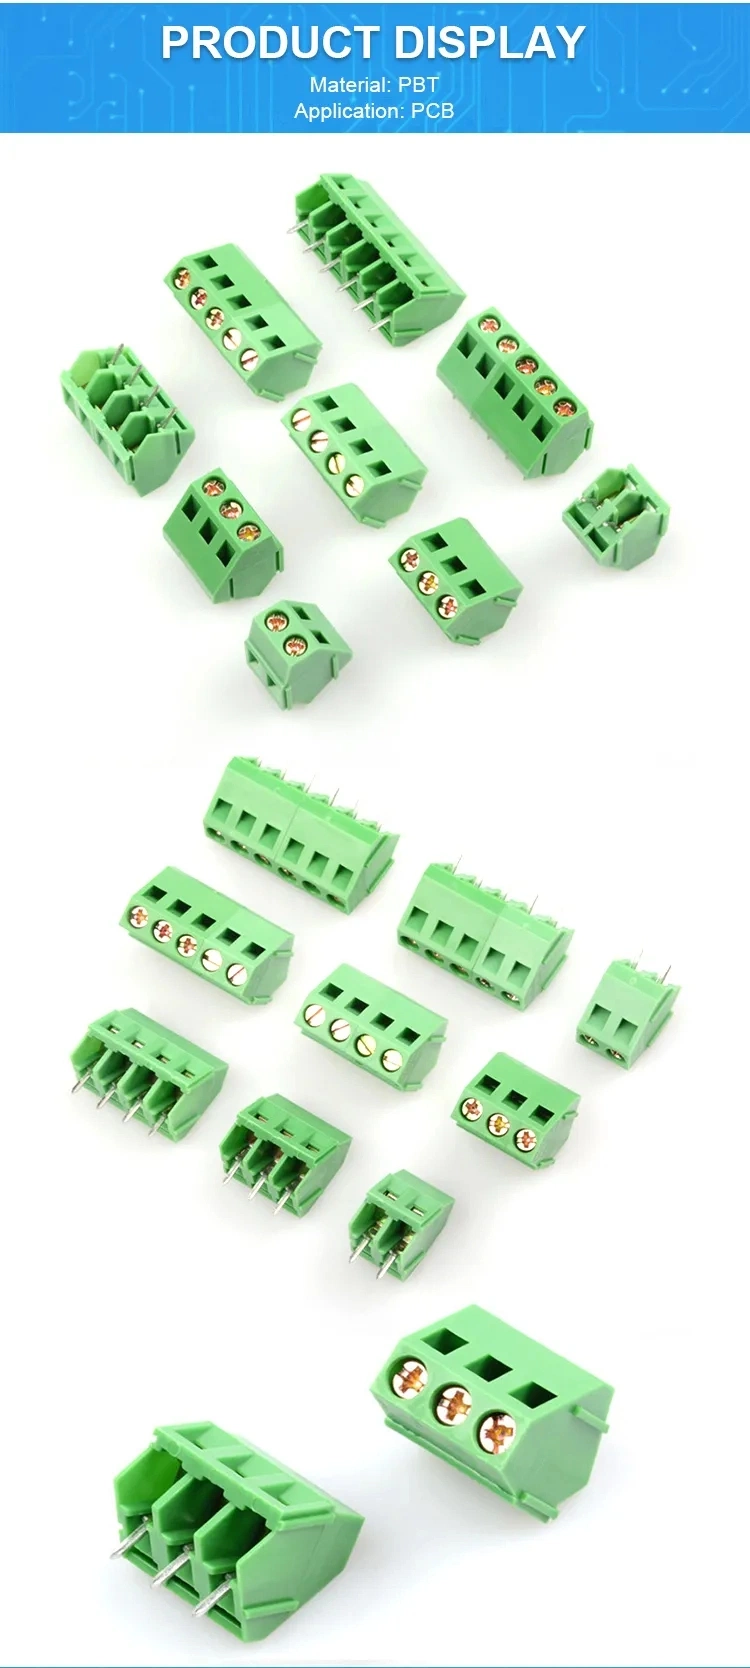 2edg Type with 3.5 3.81 5.08 7.62mm with Flange Pitch 2/3/4/5/6/7/8 -24p Pin Pluggable Terminal Block PCB Connector Screwless Terminal Block